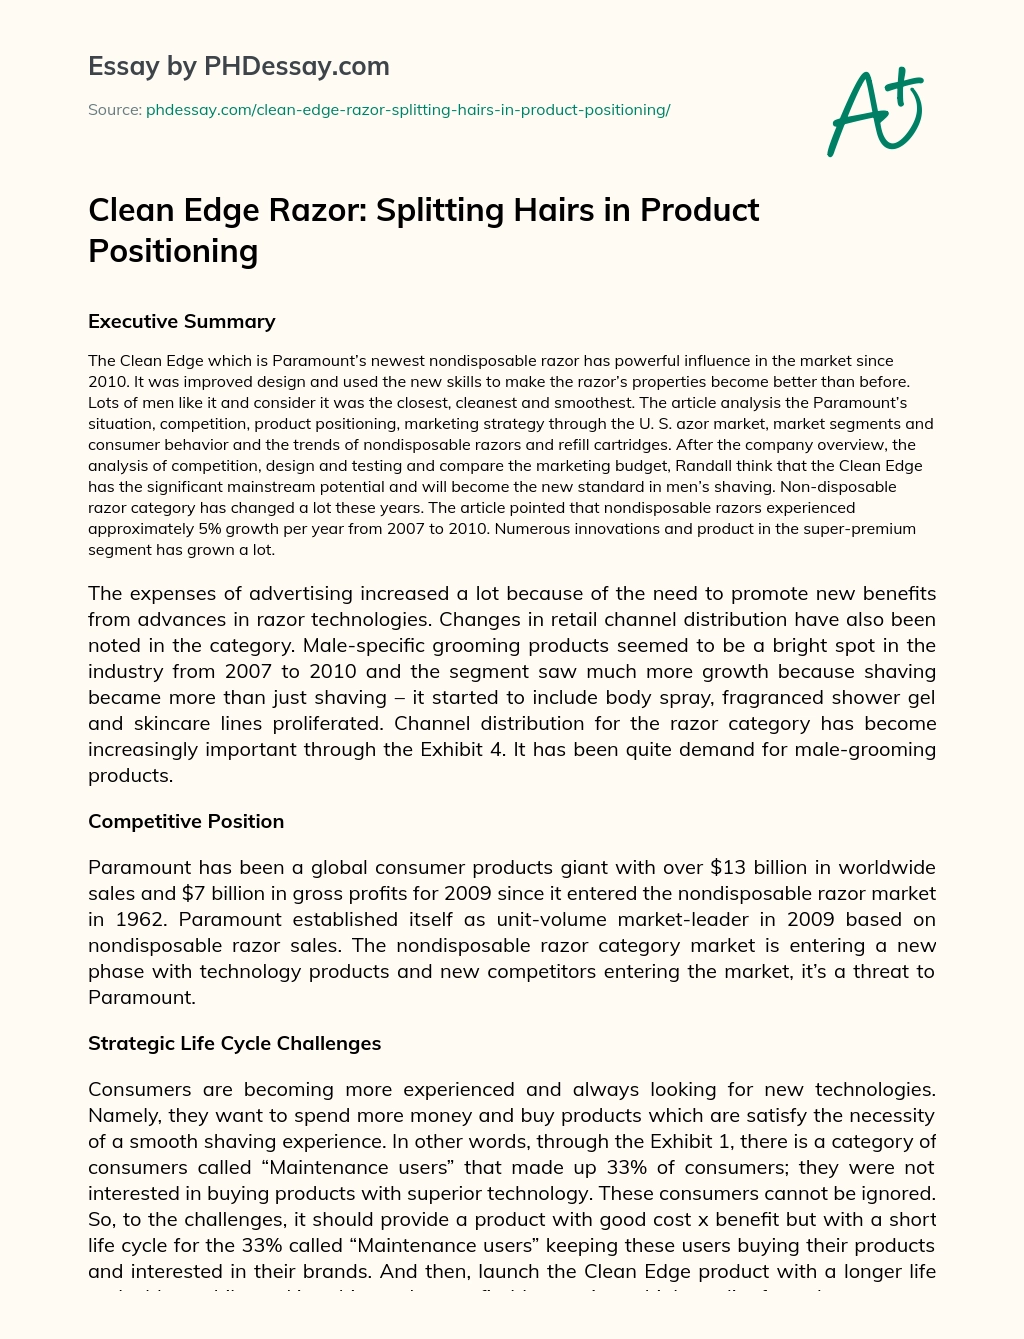 Clean Edge Razor: Splitting Hairs in Product Positioning essay